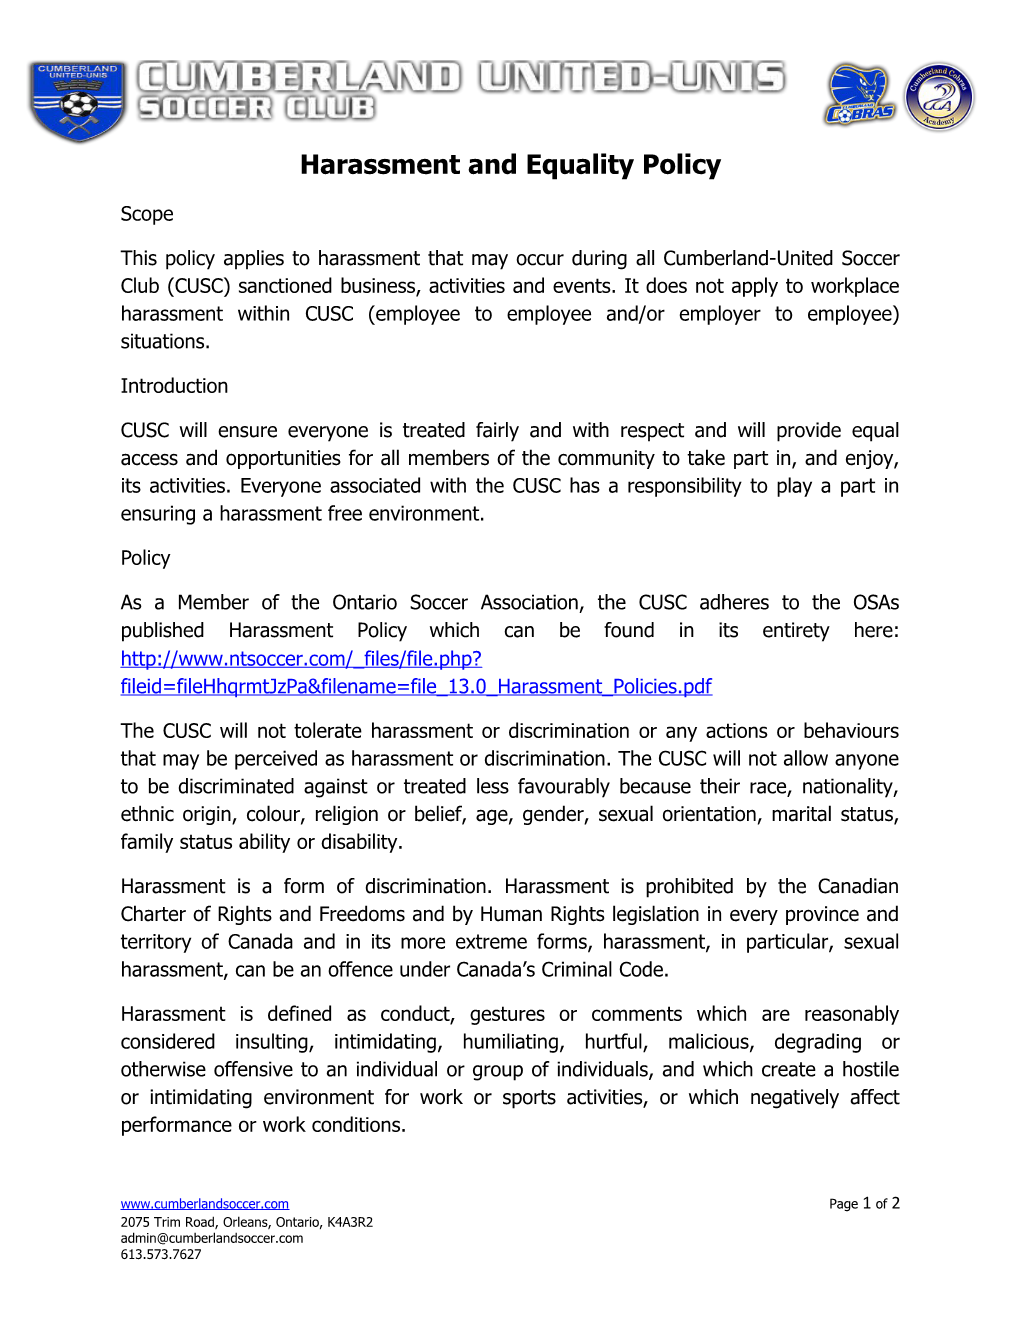 Harassment and Equality Policy